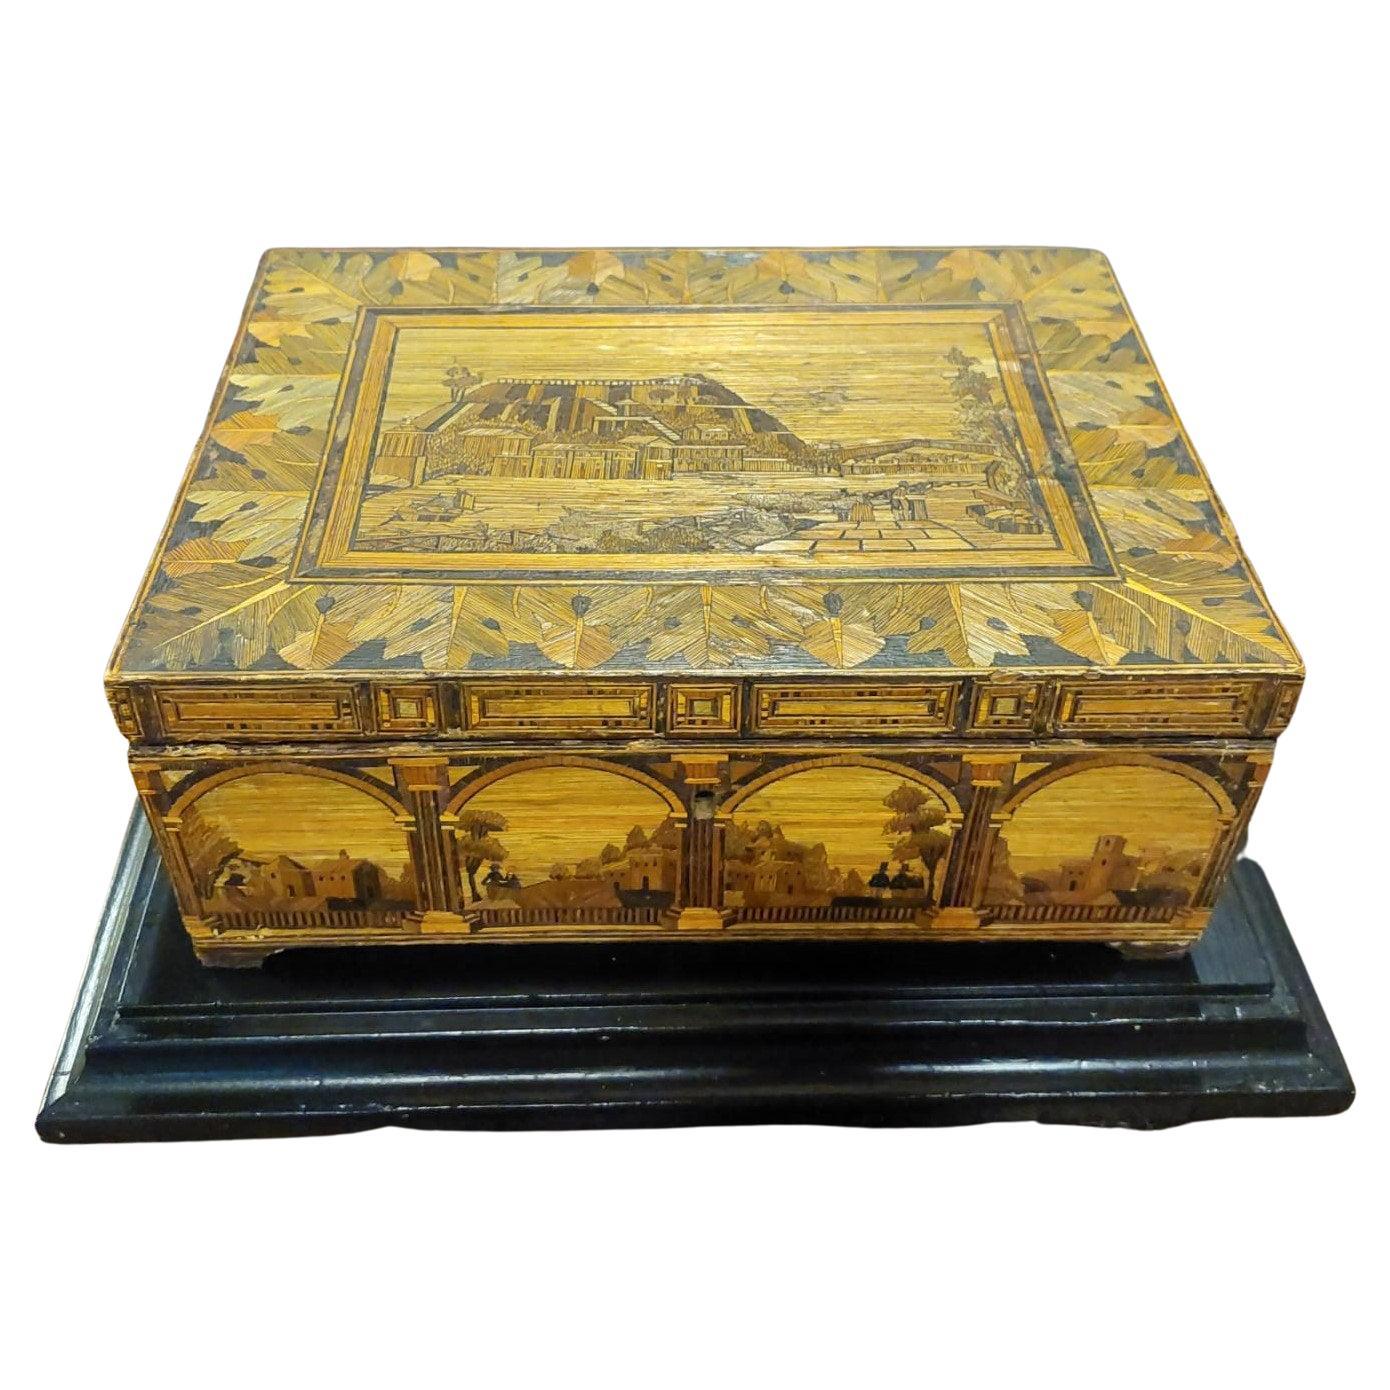 Antique Box in Inlaid Straw Threads, Classic Landscapes on All Sides, '800 Italy For Sale